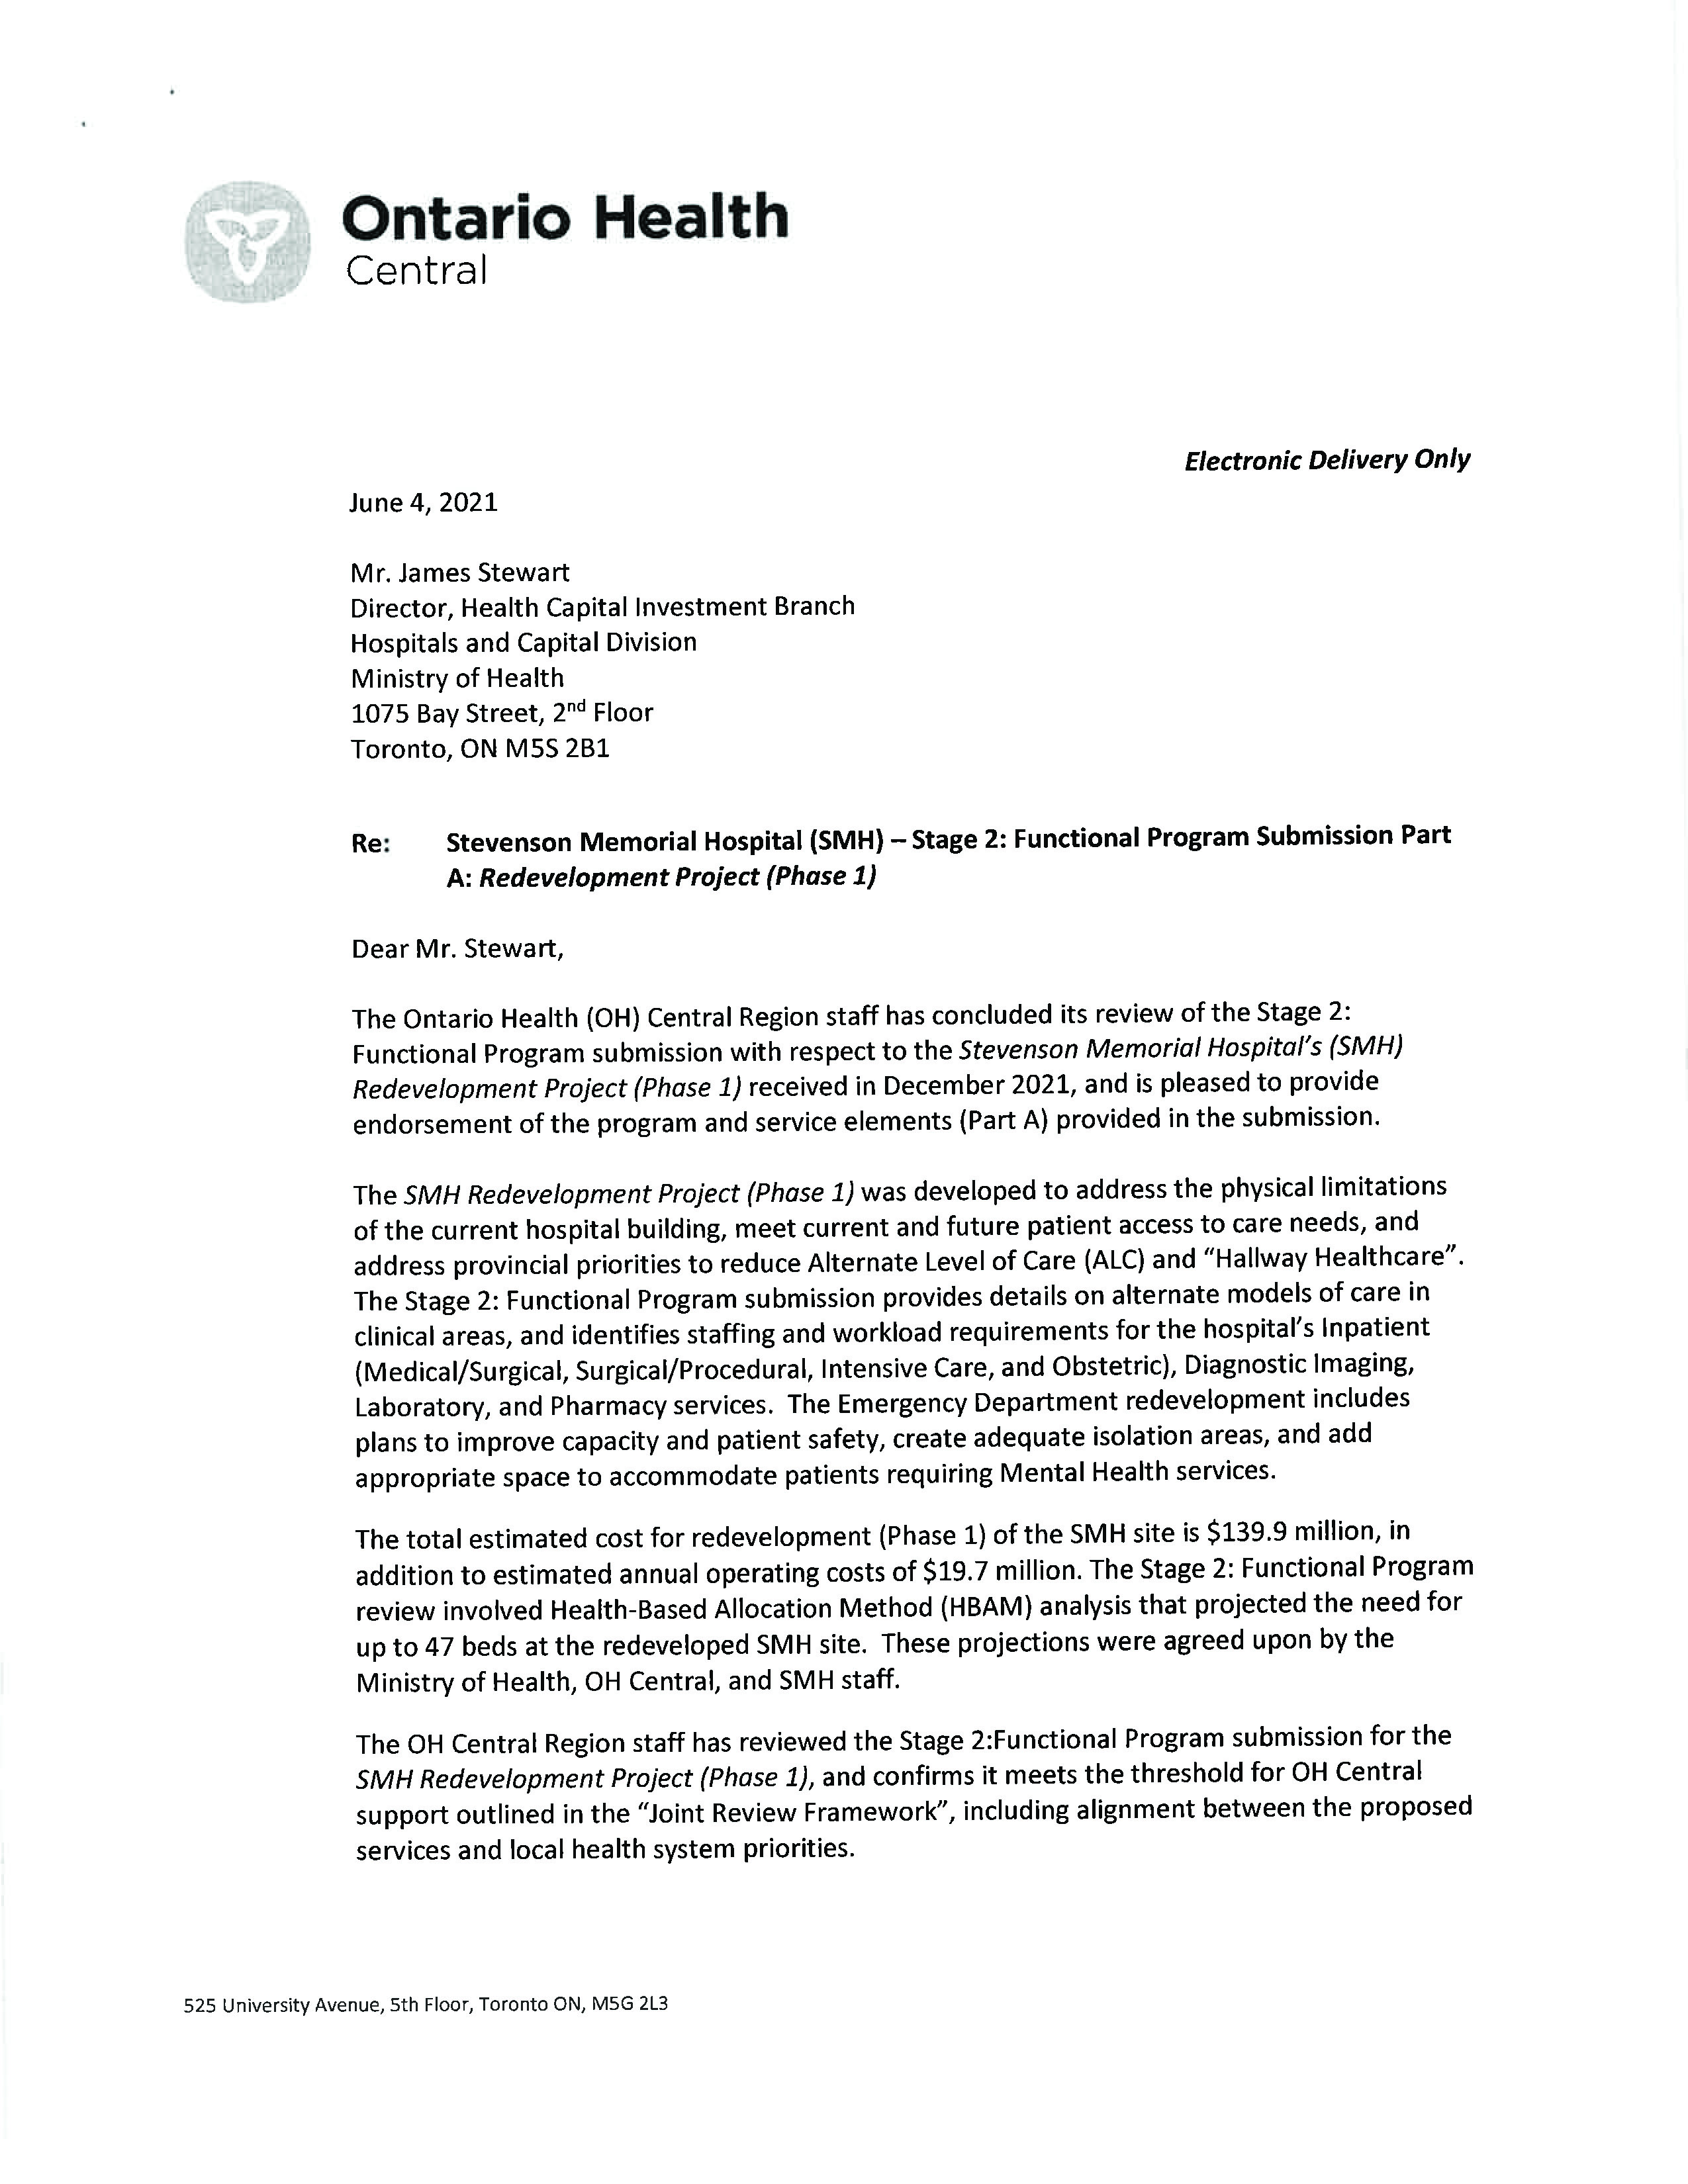 Support Letter Ontario Health